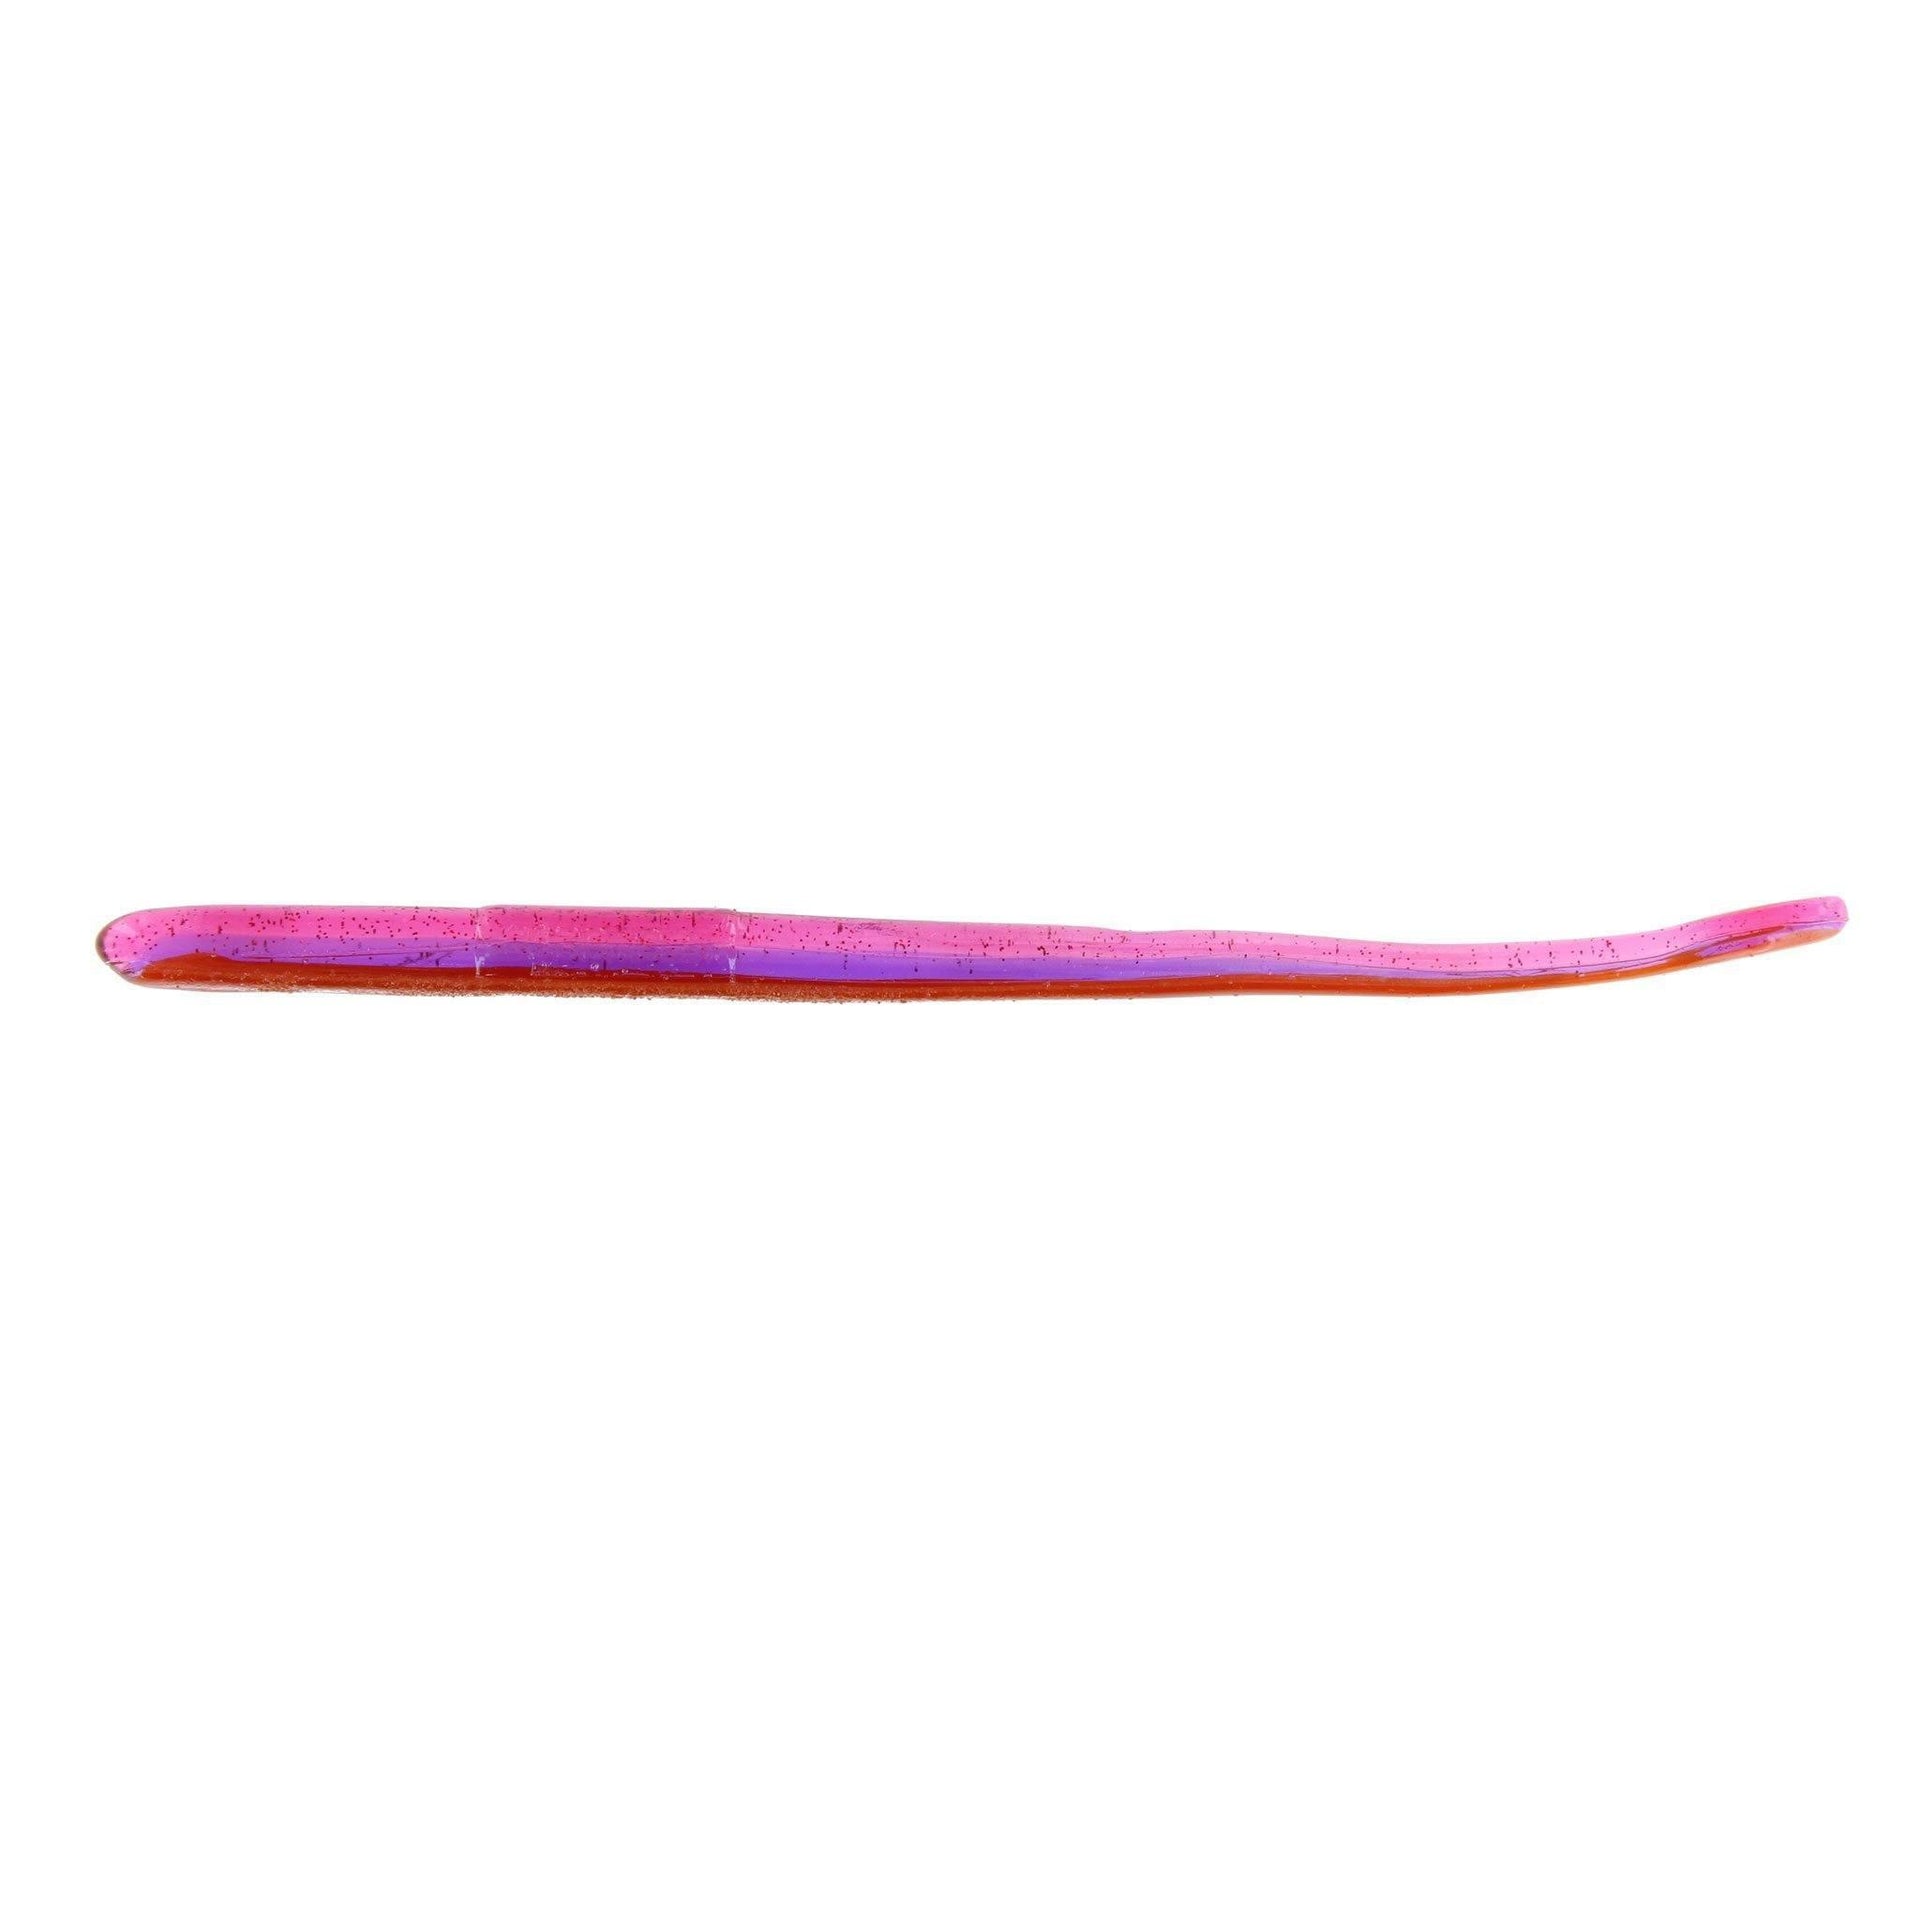 Roboworm Straight Tail 4.5 St-H2Tr Red Crawler 10Pk